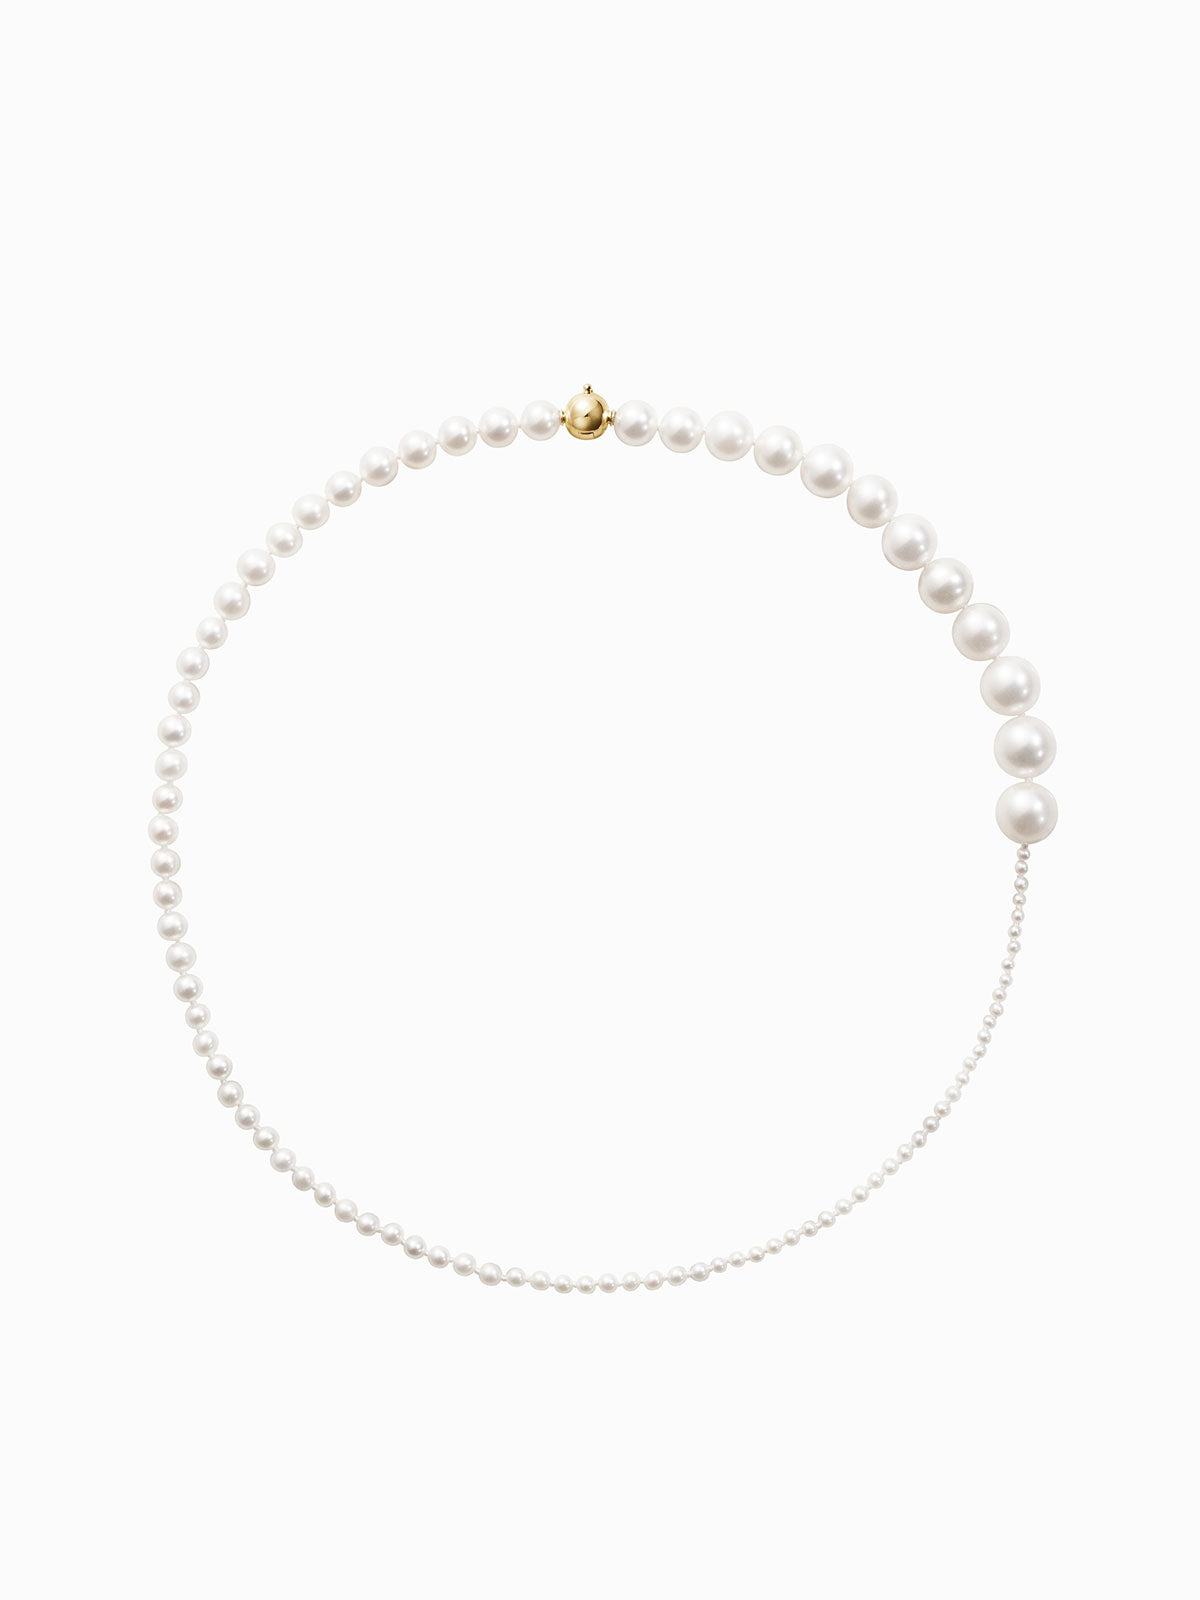 SOPHIE BILLE BRAHE Peggy COLLIER 42cm FRESHWATER PEARLS 14k Yellow